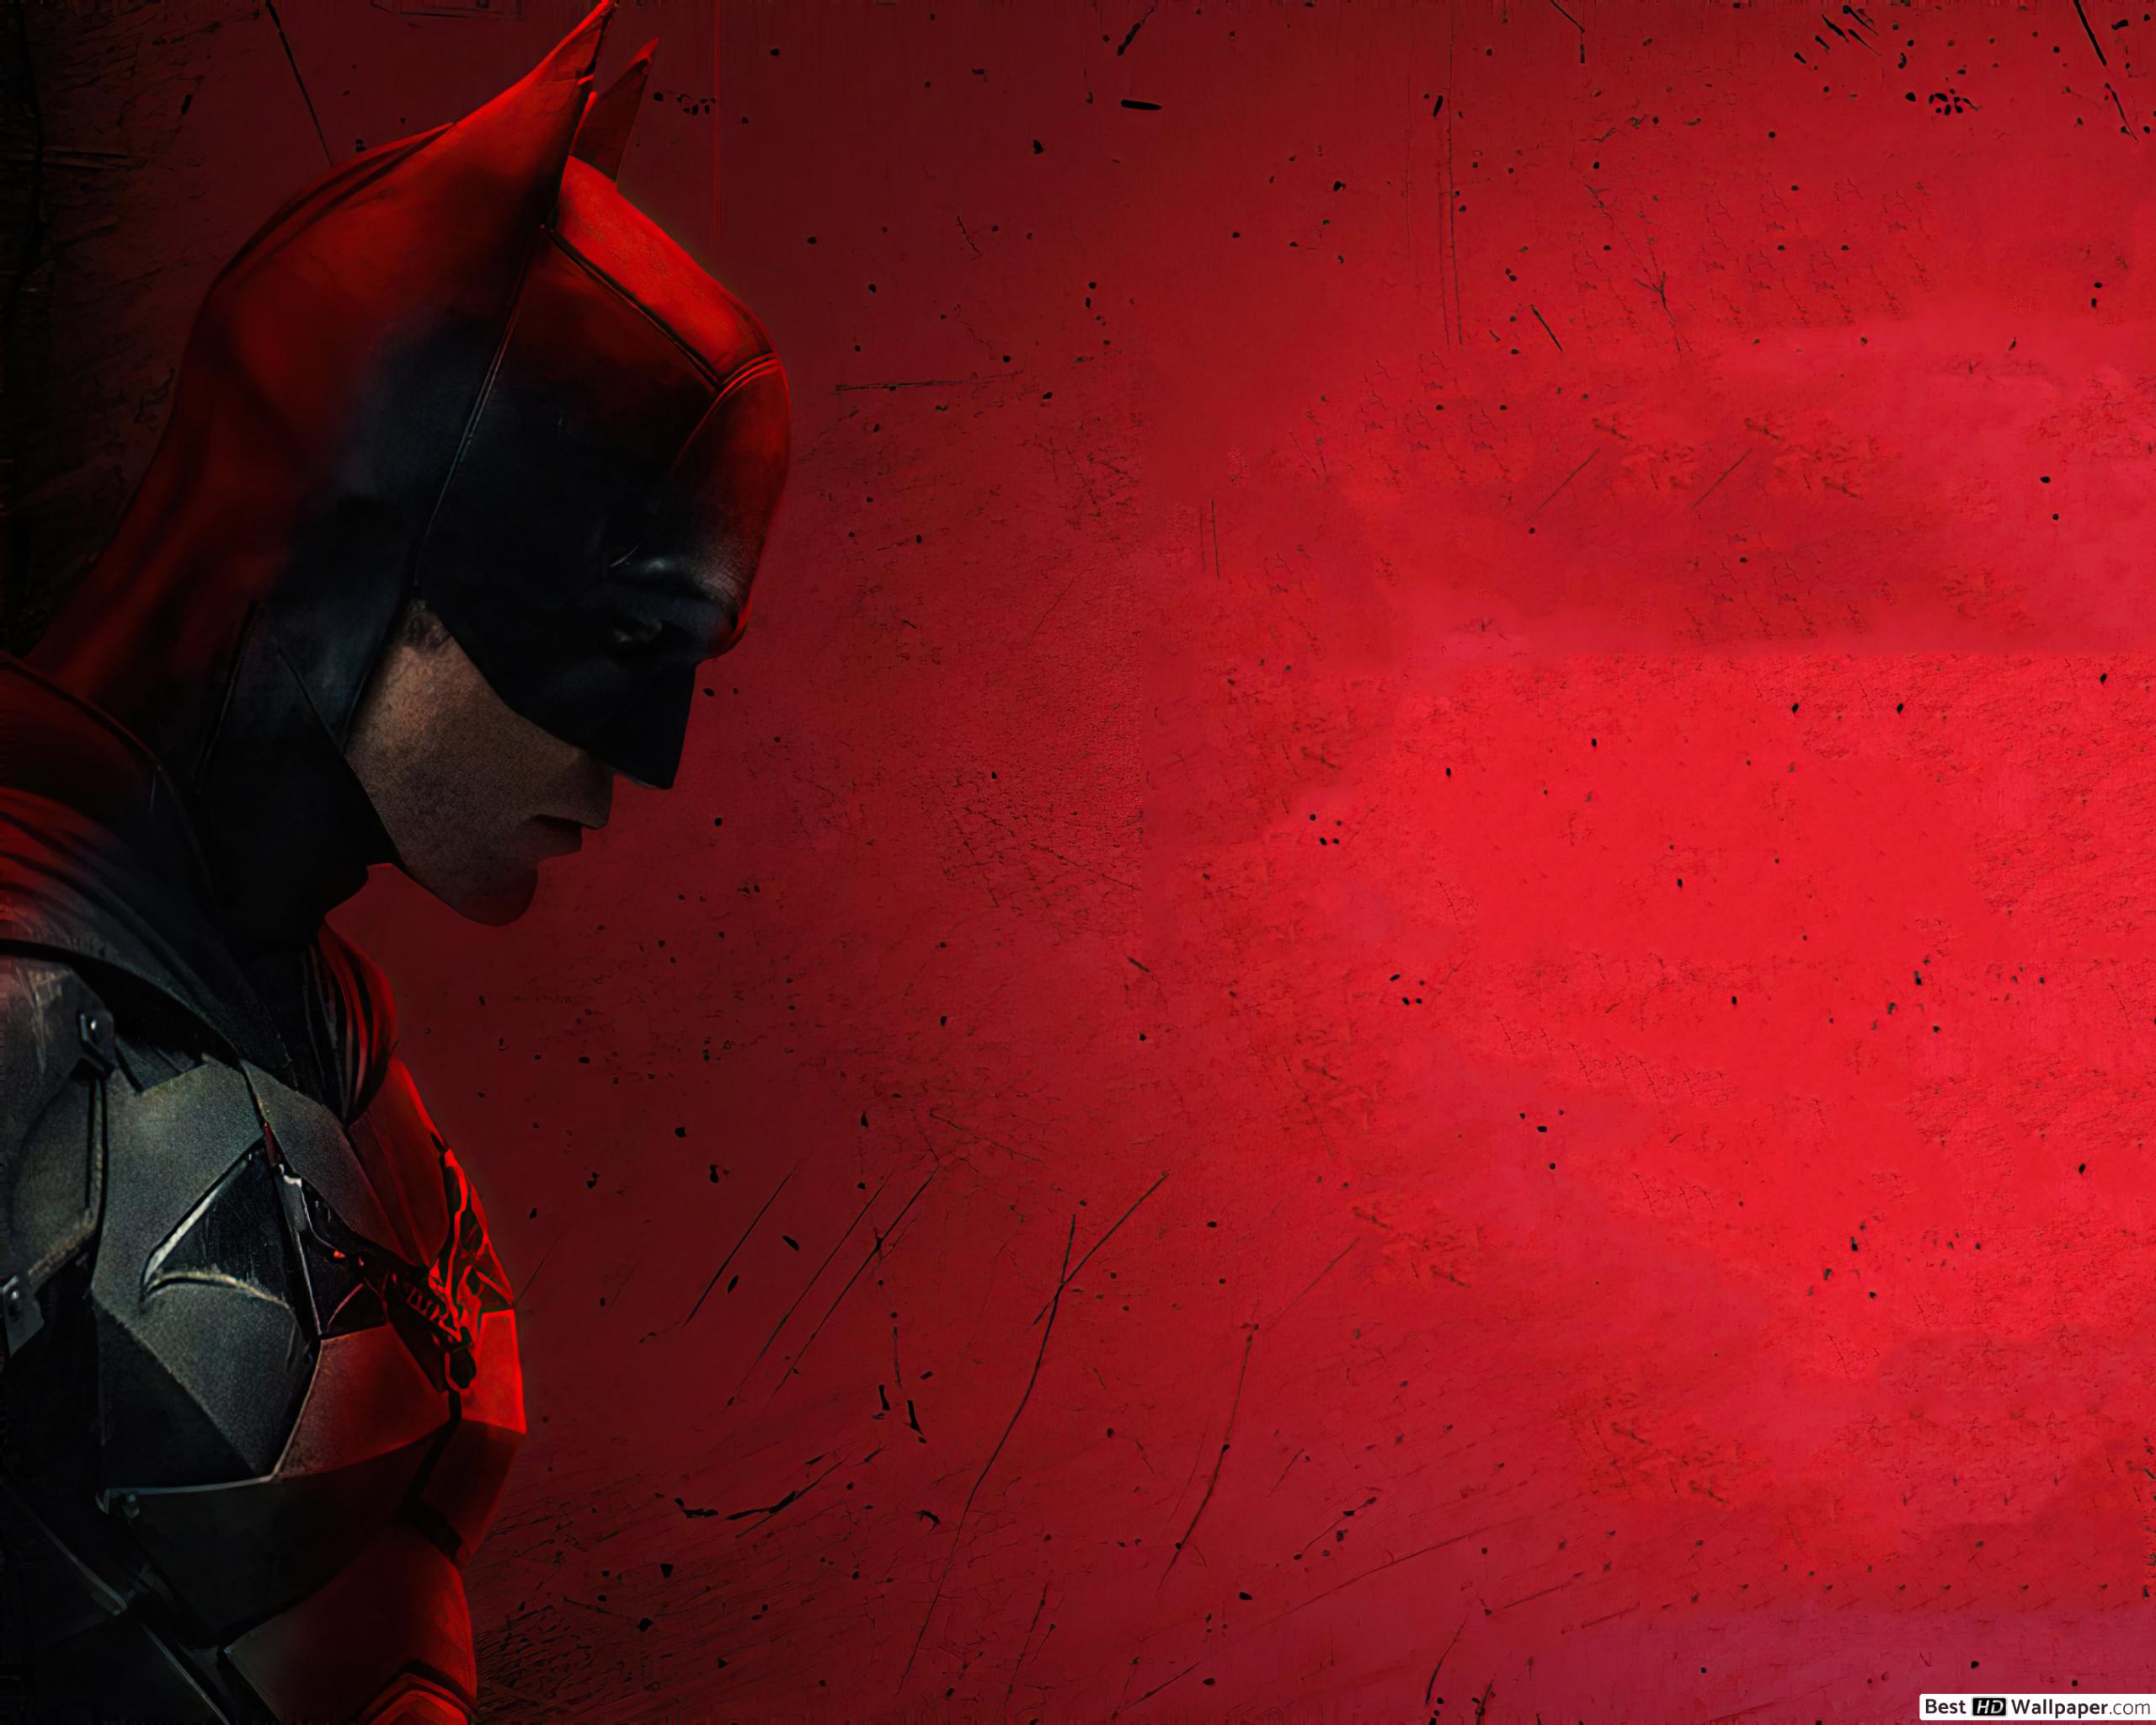 3D Batman live wallpaper and Daydream Free Android Live Wallpaper download   Download the Free 3D Batman live wallpaper and Daydream Live Wallpaper to  your Android phone or tablet